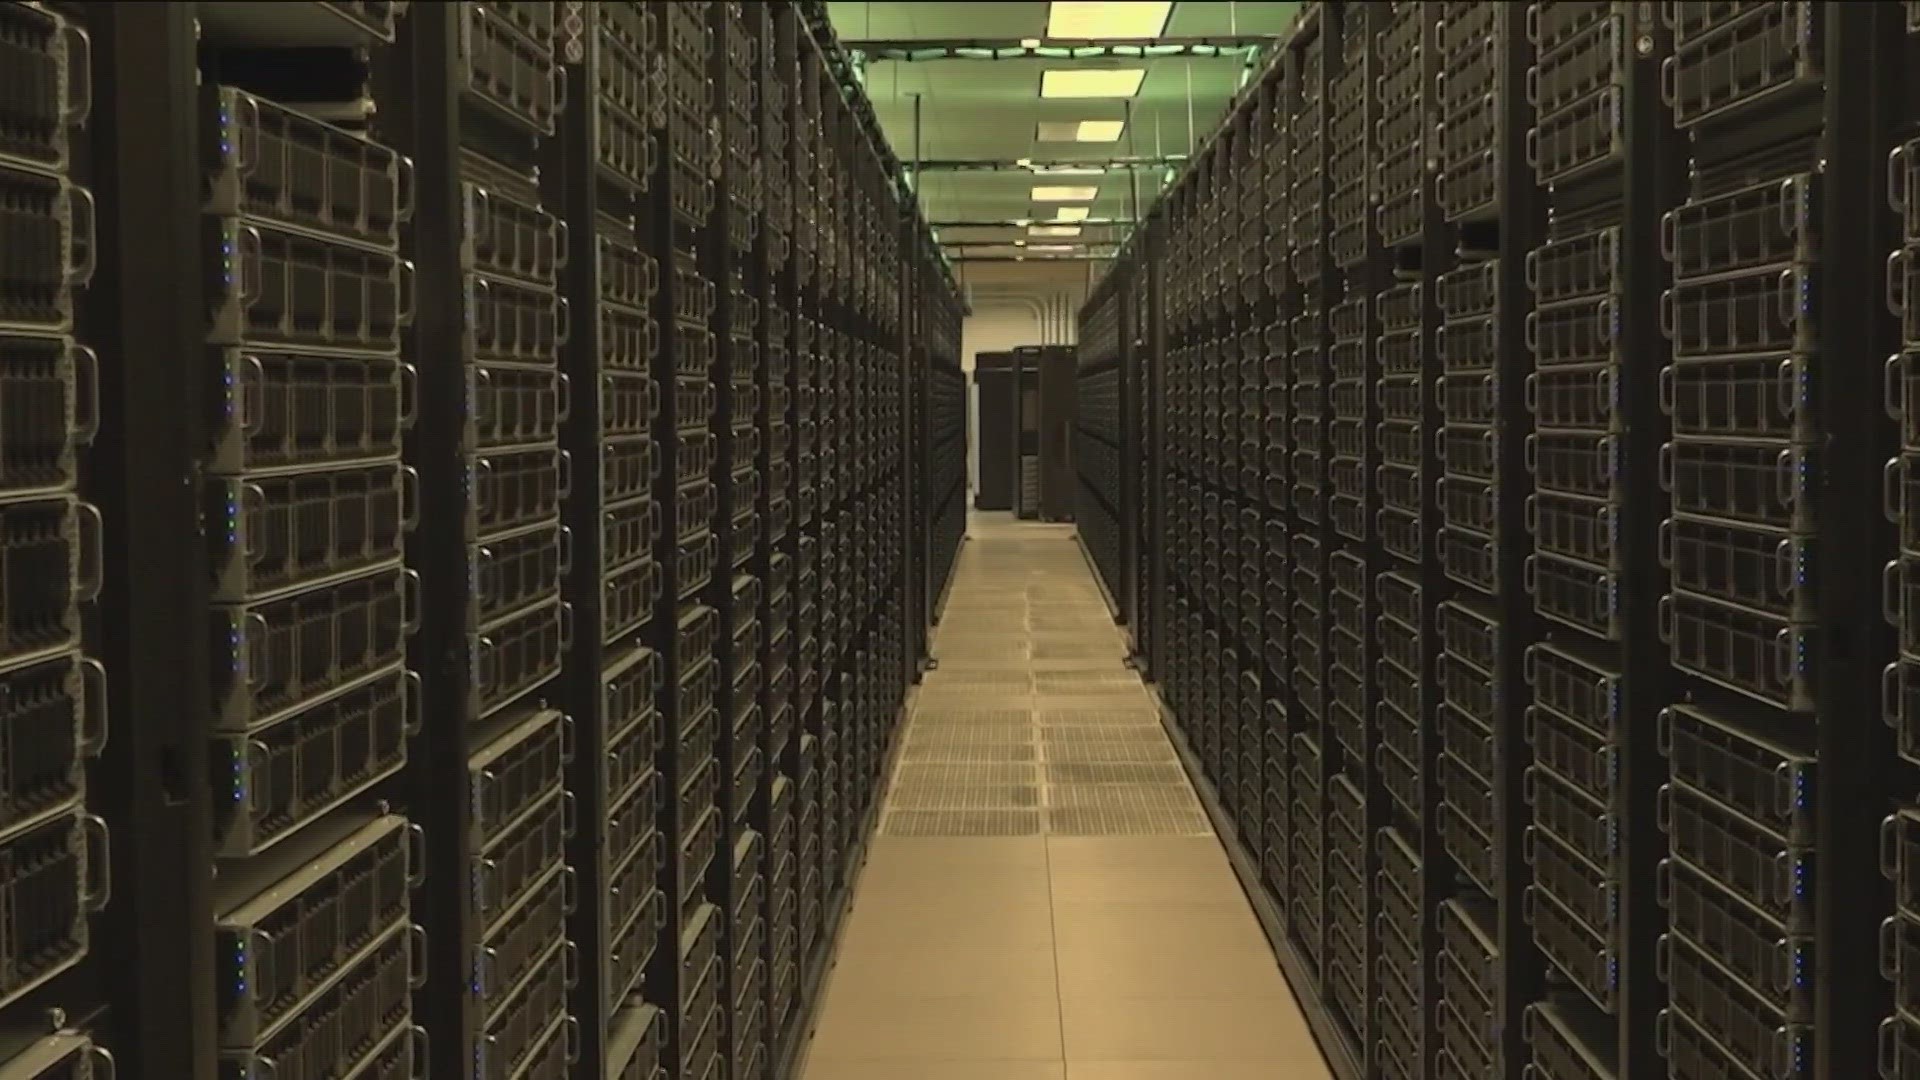 Massive data centers are popping up all around Central Texas. KVUE's Matt Fernandez takes us inside one of these centers.